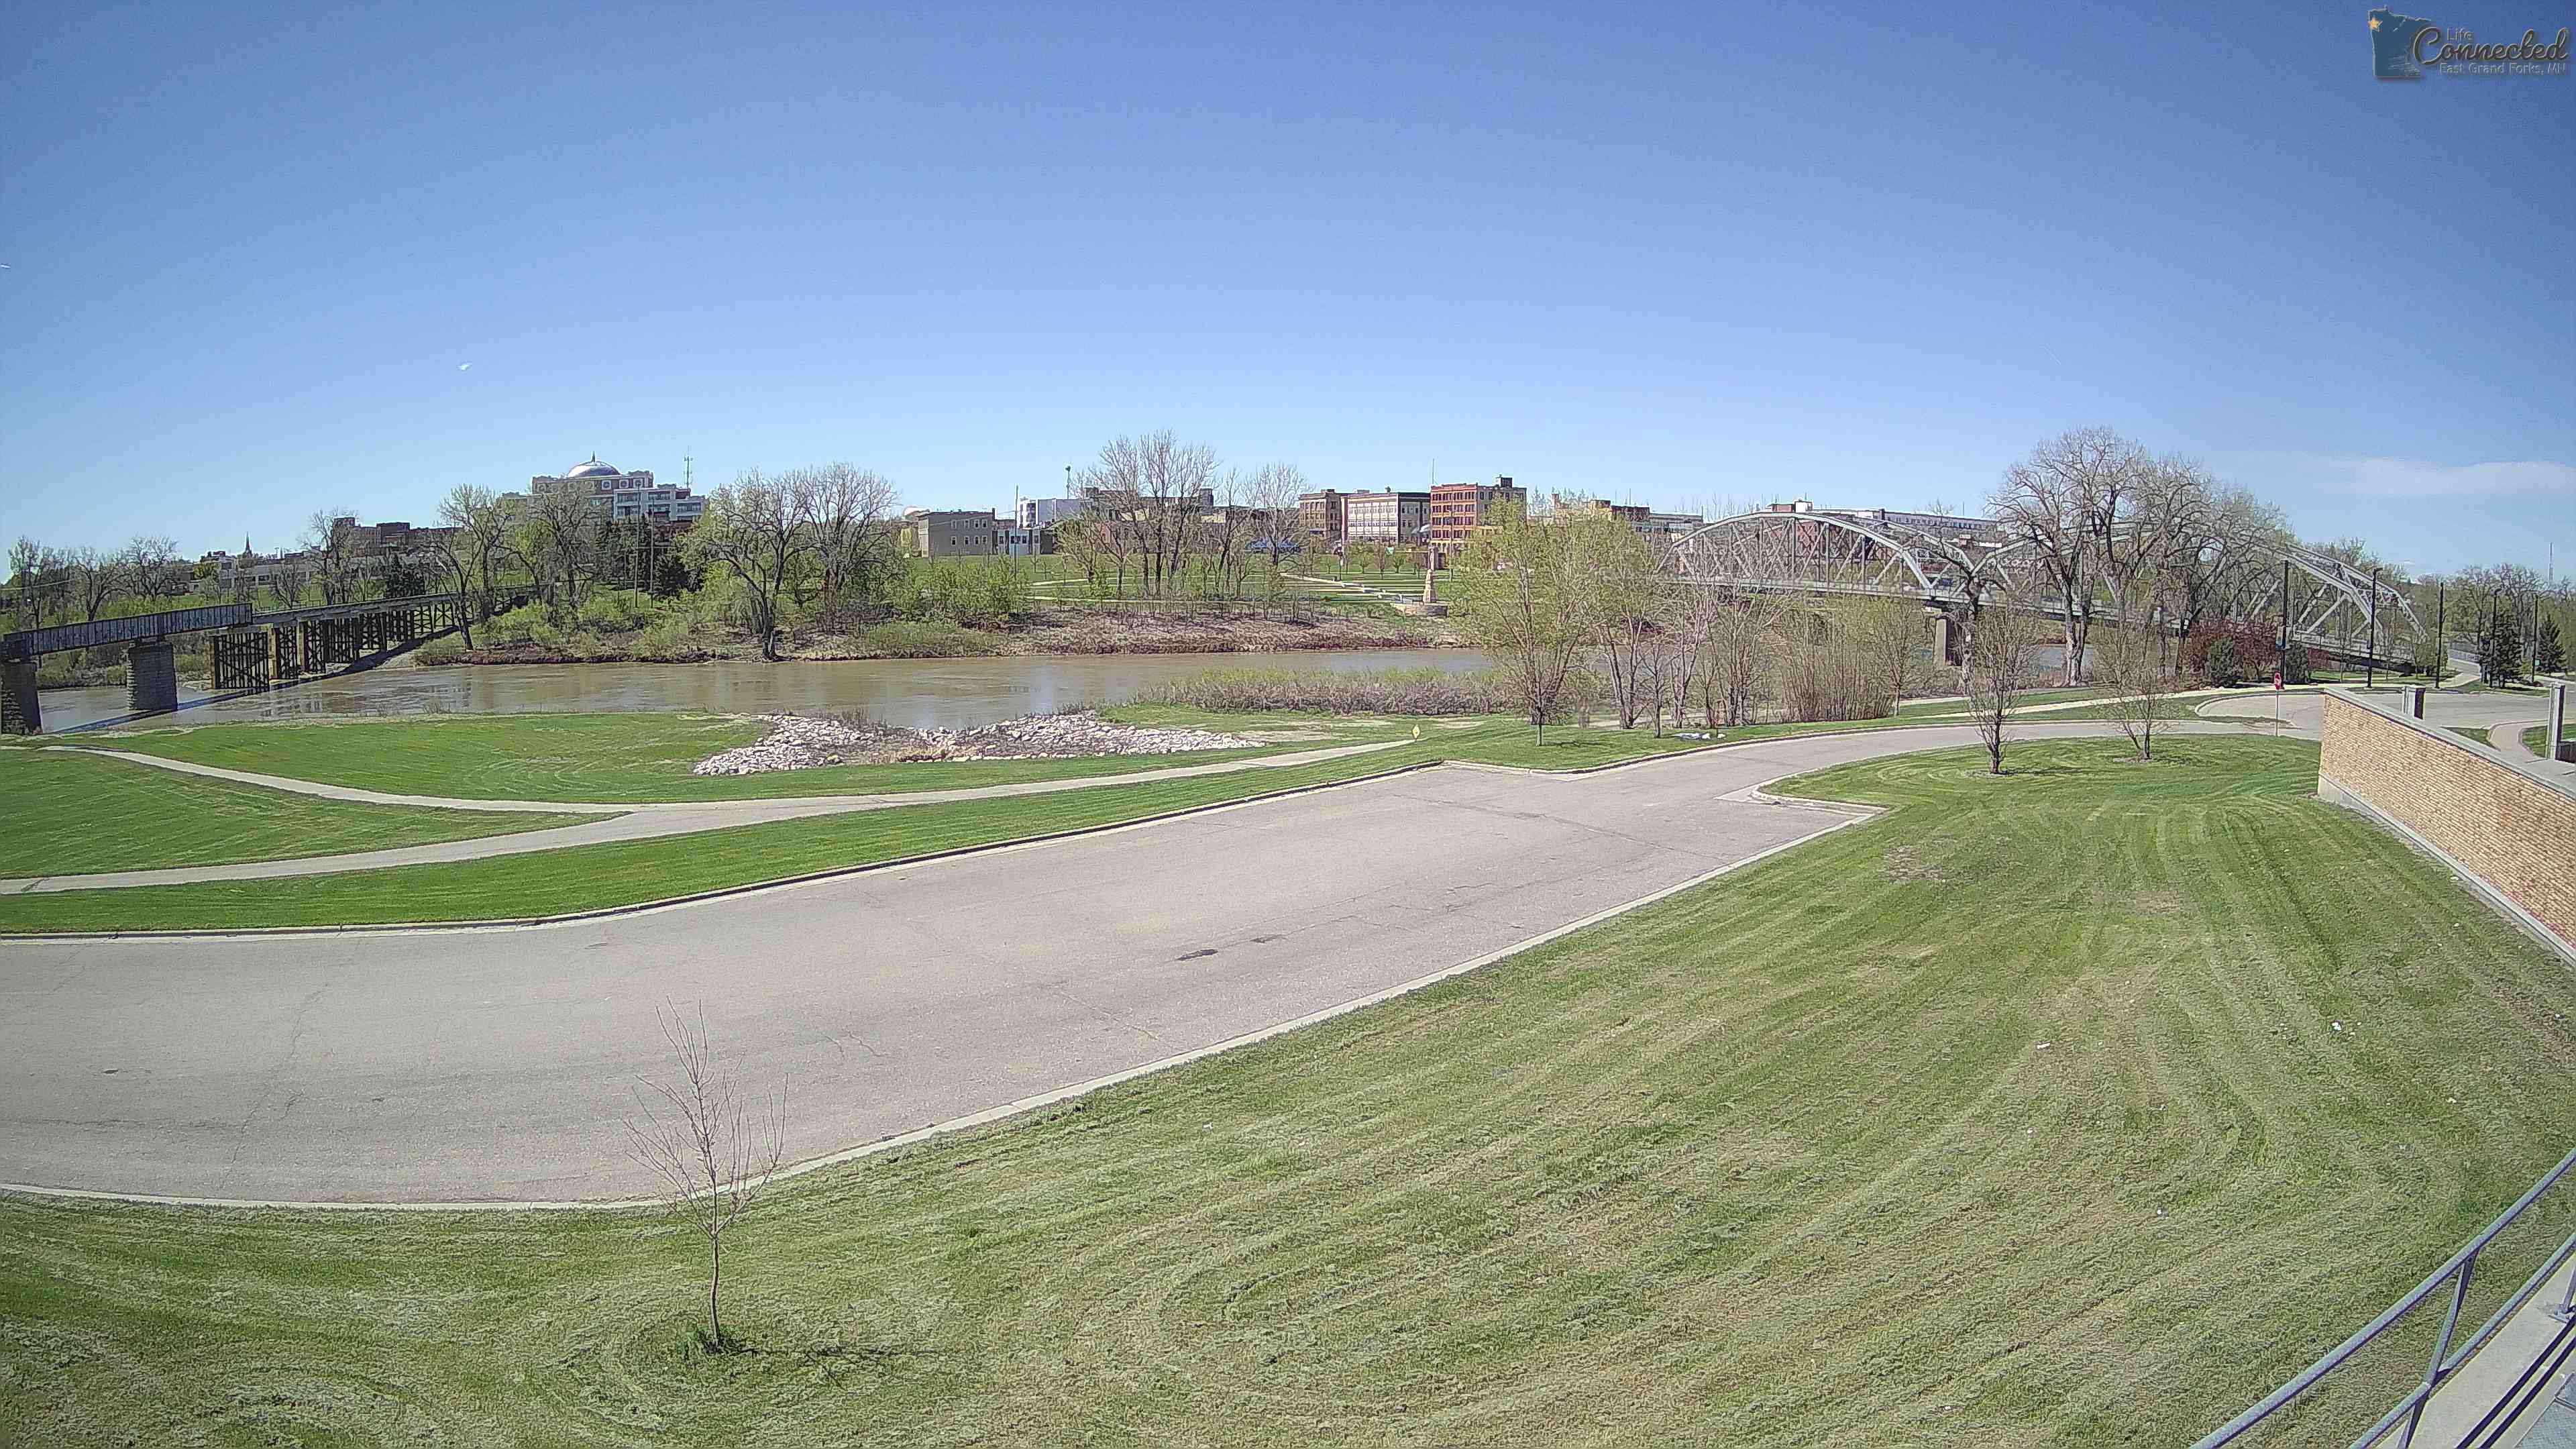 Live camera view of the Red River of the North near the Sorlie Bridge between East Grand Forks, MN and Grand Forks, ND